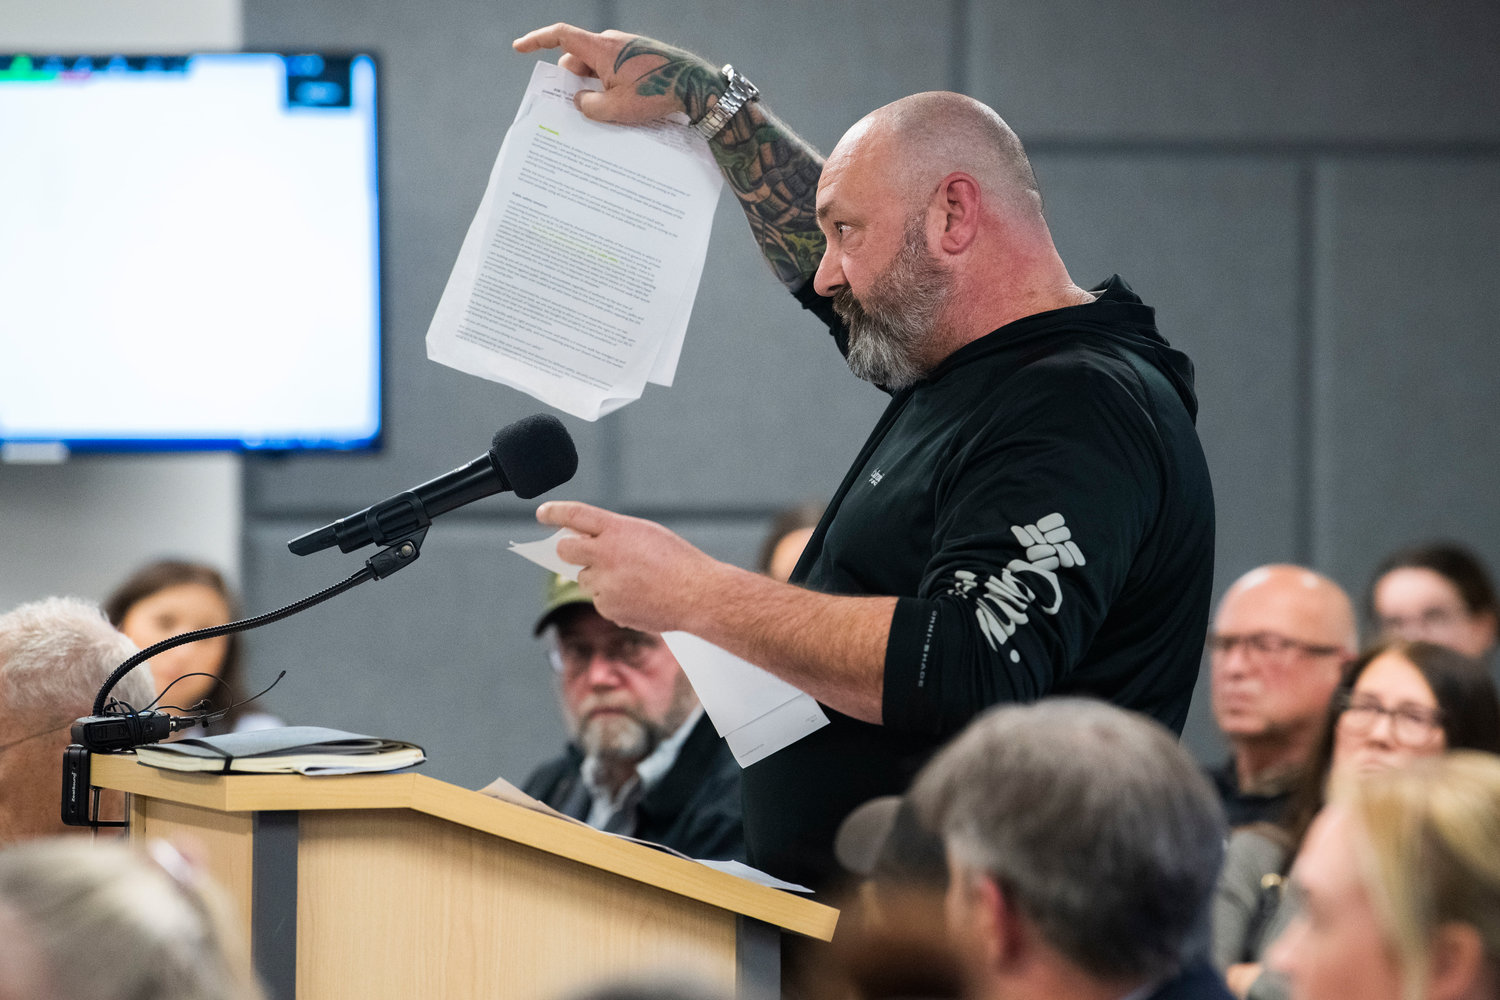 RCWs are held up as Tenino residents speak out in opposition of the Supreme Living facility located at 2813 140th Avenue Southwest in Tenino during a meeting with Thurston County Commissioners in Olympia on Tuesday.